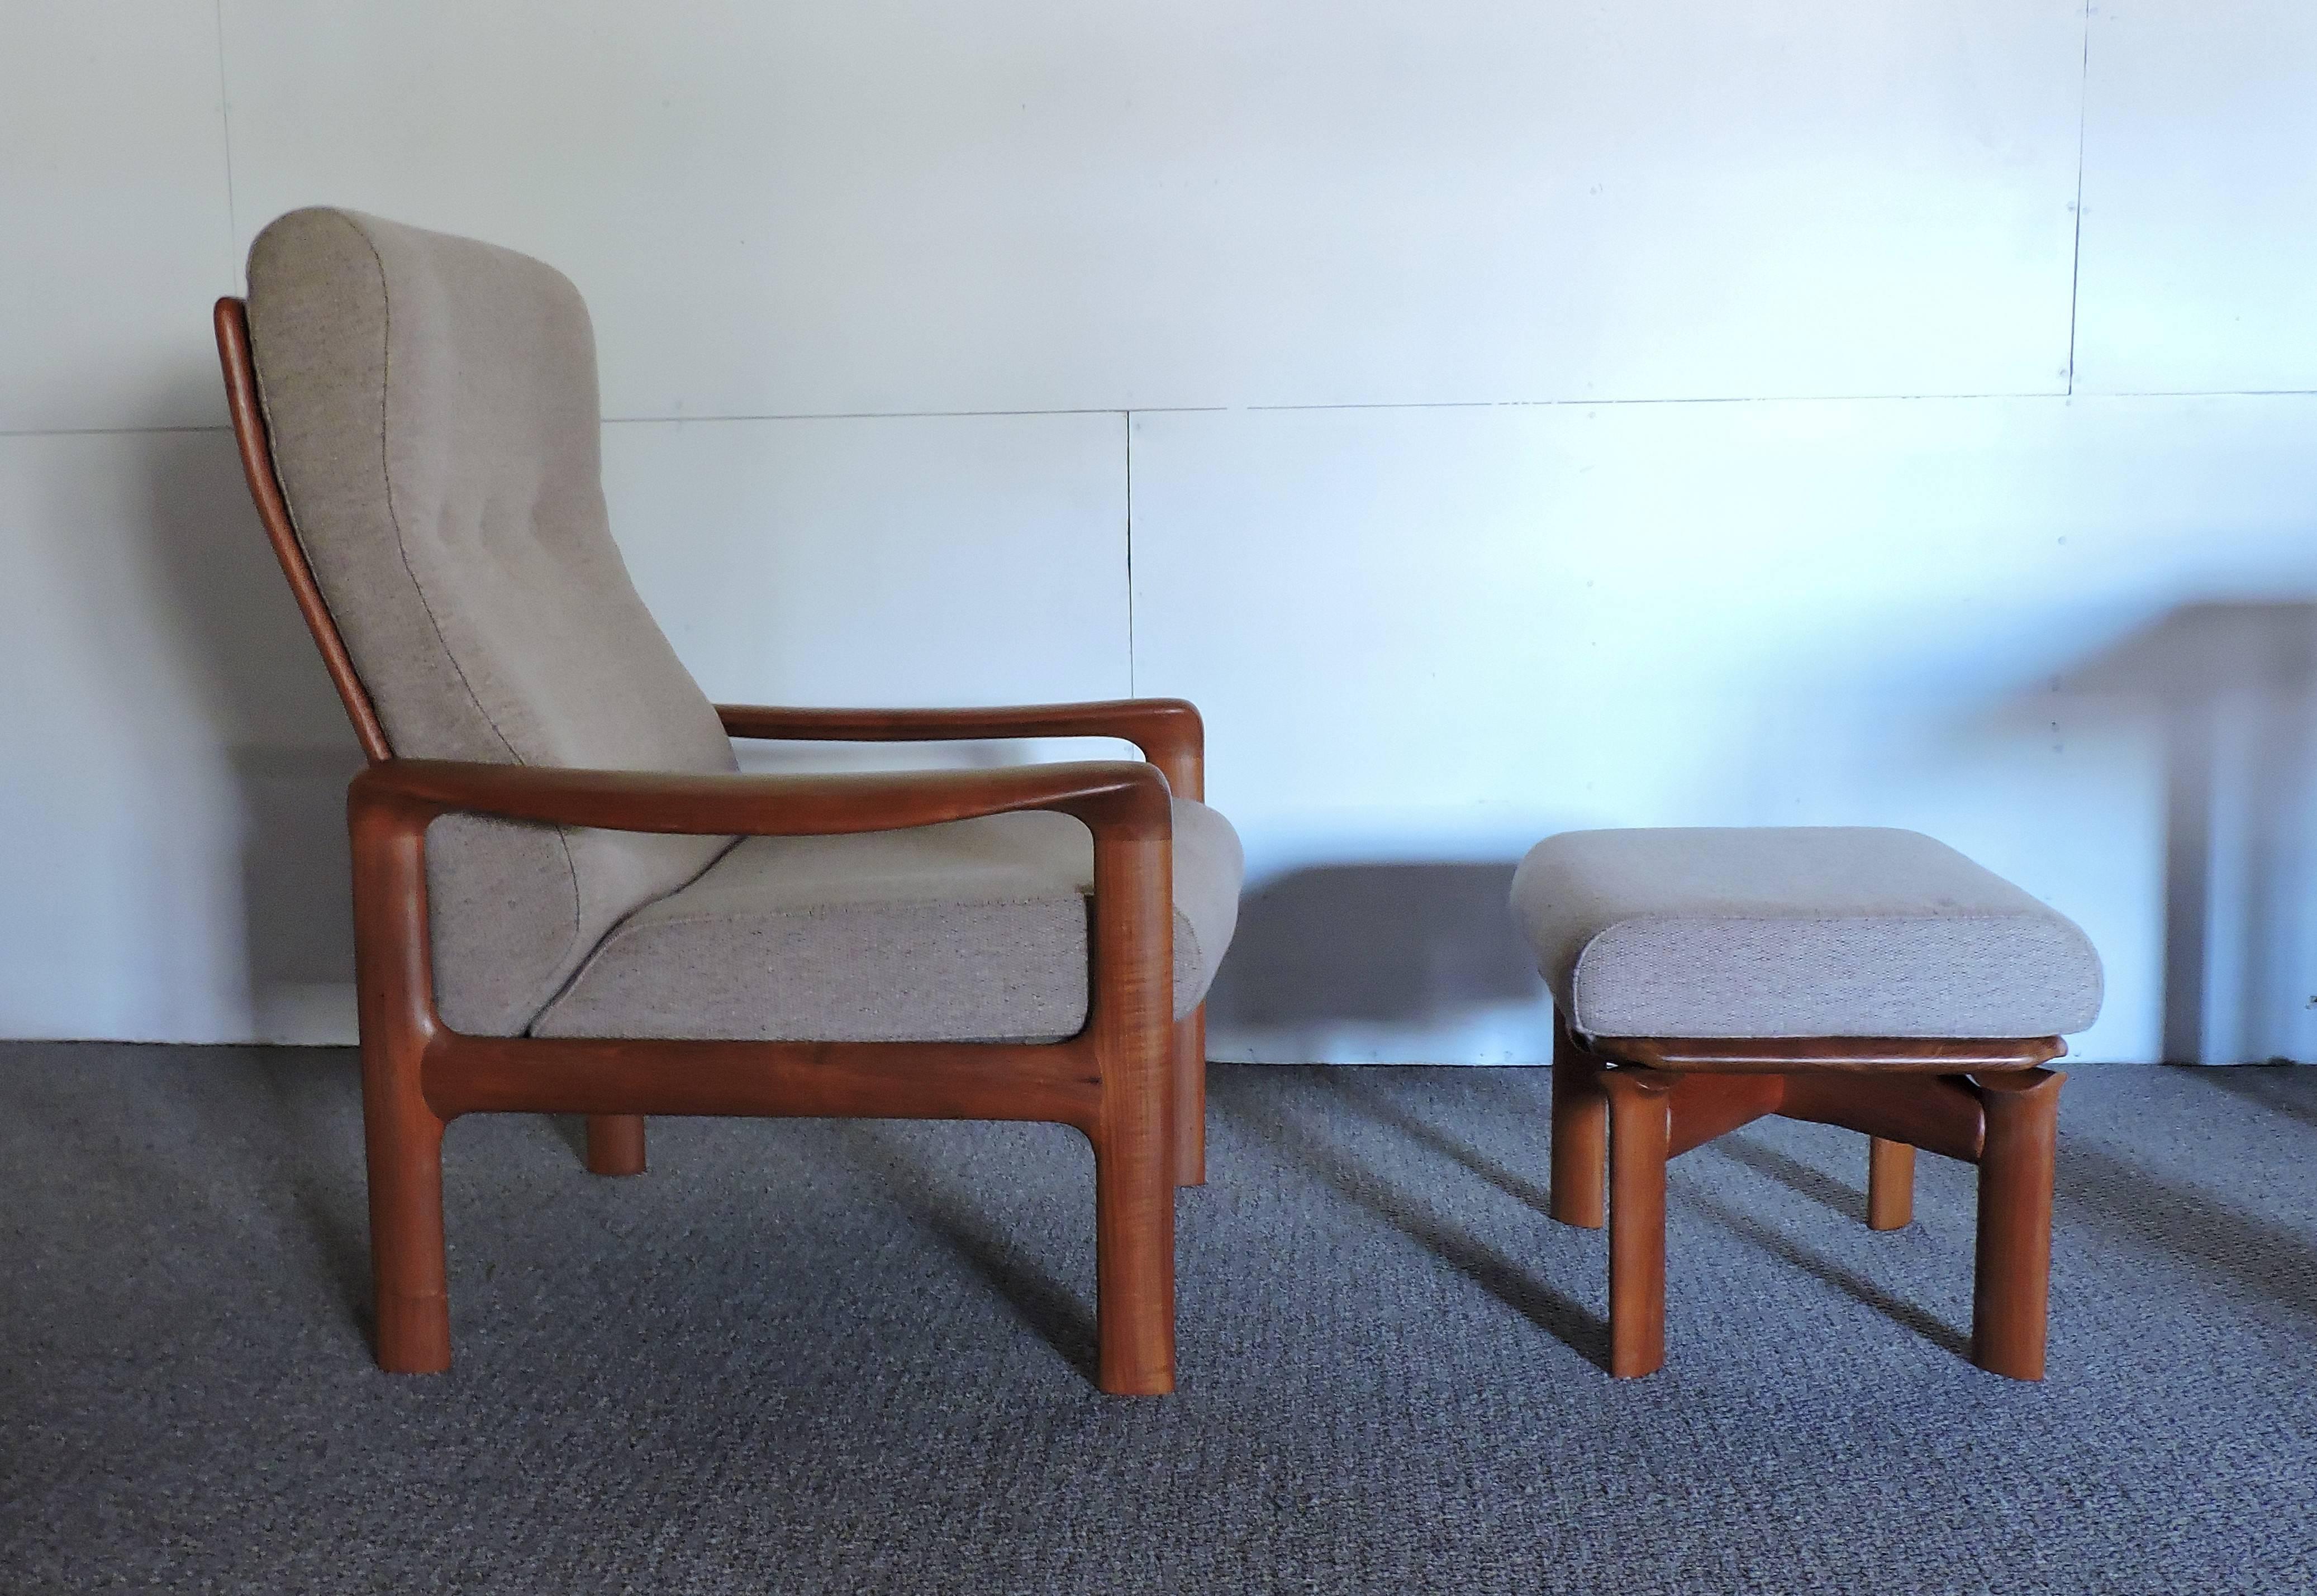 Extremely comfortable high back lounge chair and ottoman made by Komfort of Denmark. This sturdy and well made chair has a solid teak frame with beautiful sculpted arms, a curved slat back, and the original light tan upholstery.
Excellent